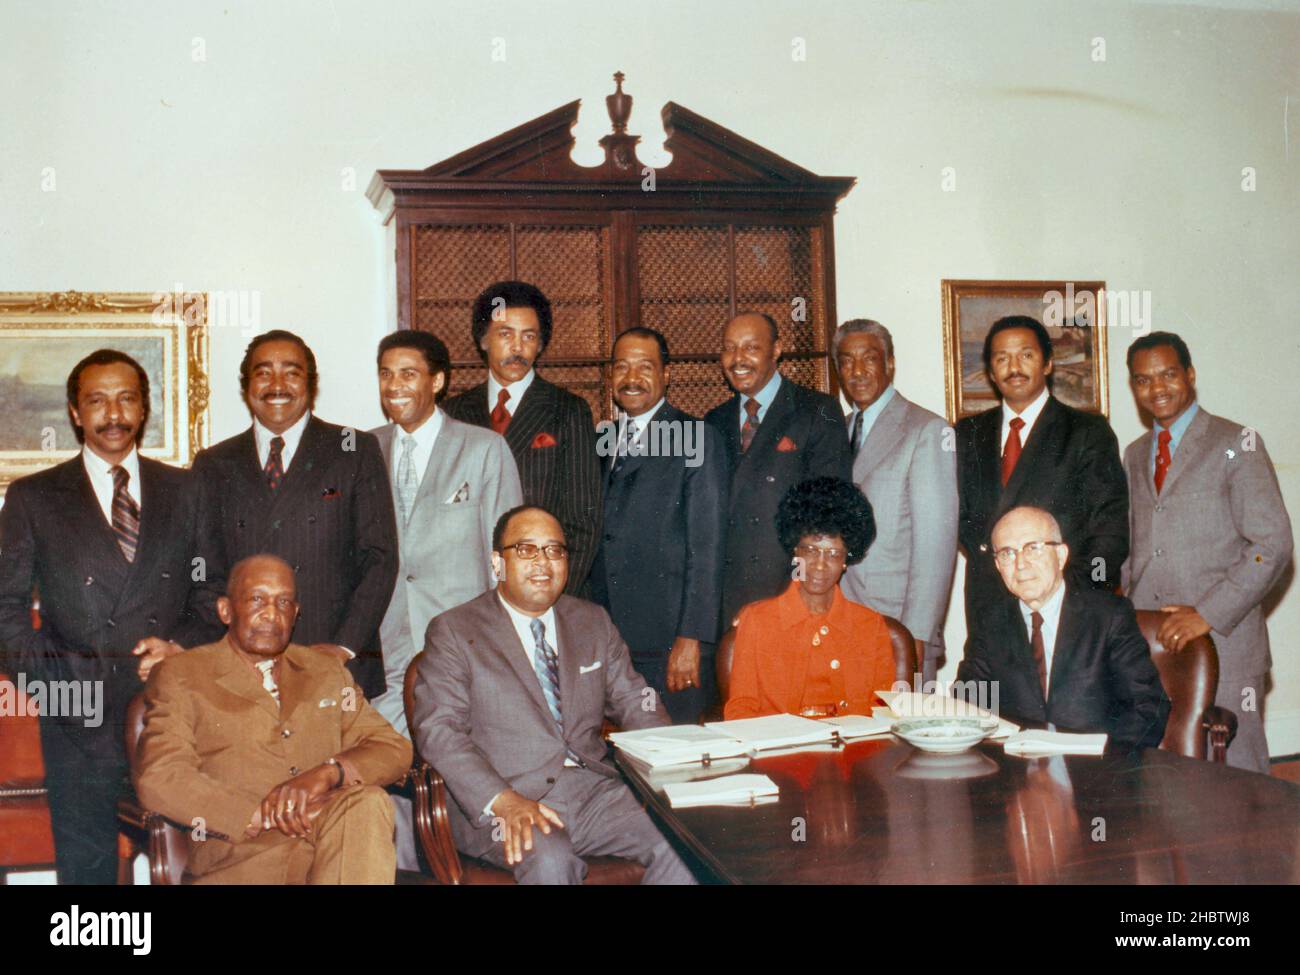 Founding members of the Congressional Black Caucus. Standing L-R: Parren Mitchell, Charles Rangel, Bill Clay, Ron Dellums, George W. Collins, Louis Stokes, Ralph Metcalfe, John Conyers, and Walter Fauntroy. Seated L-R: Robert N.C. Nix, Sr., Charles Diggs, Shirley Chisholm, and Augustus F. Hawkins Stock Photo